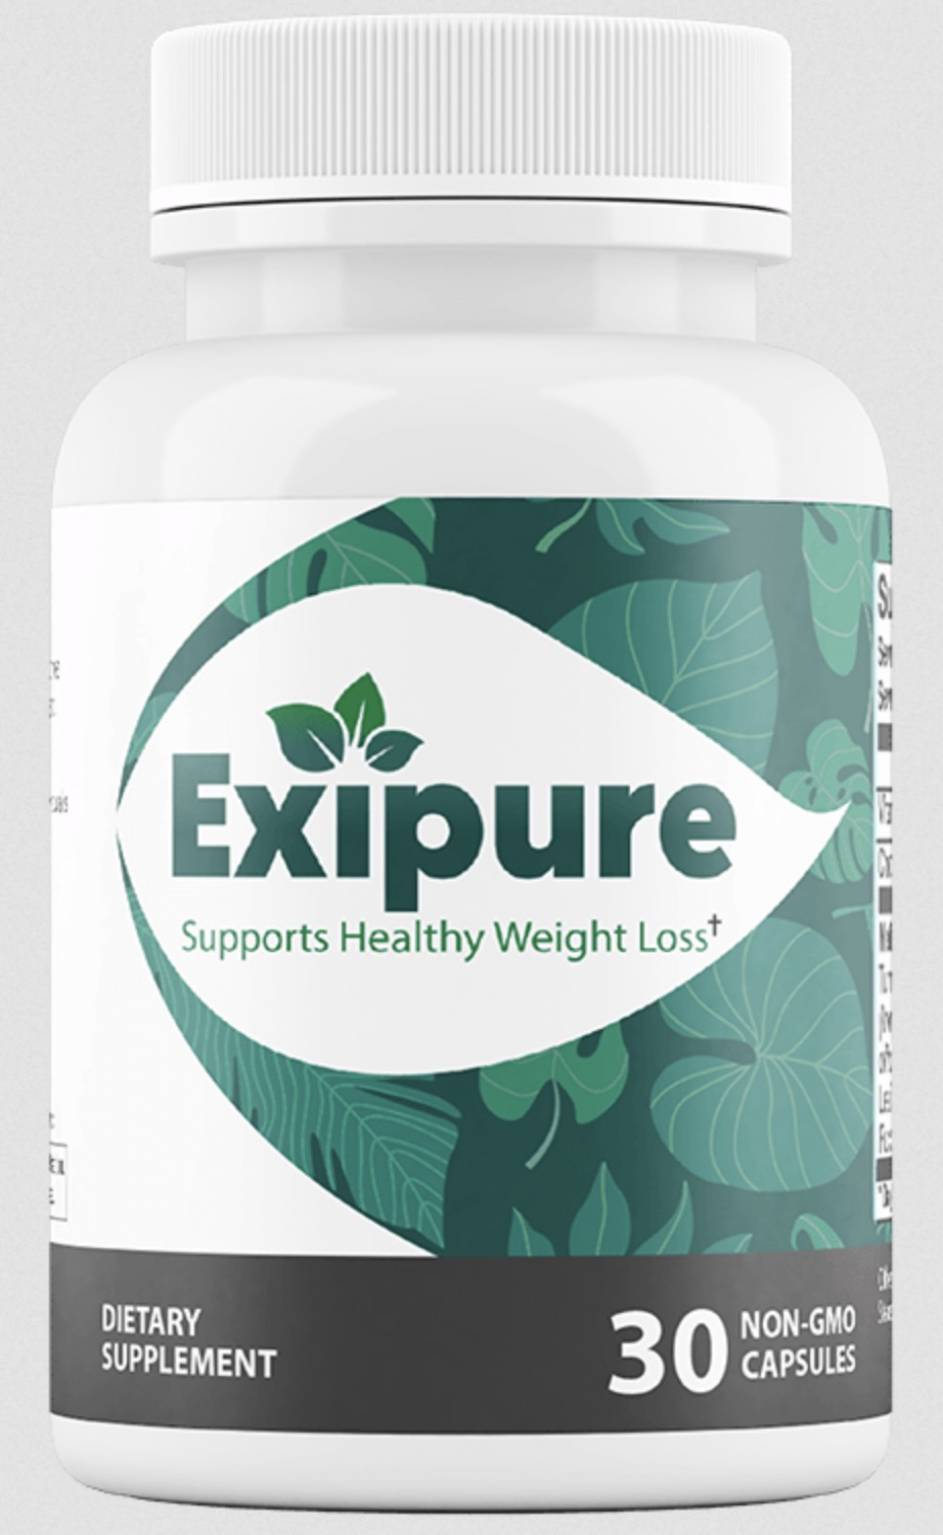 How Long Does It Take For Exipure To Work